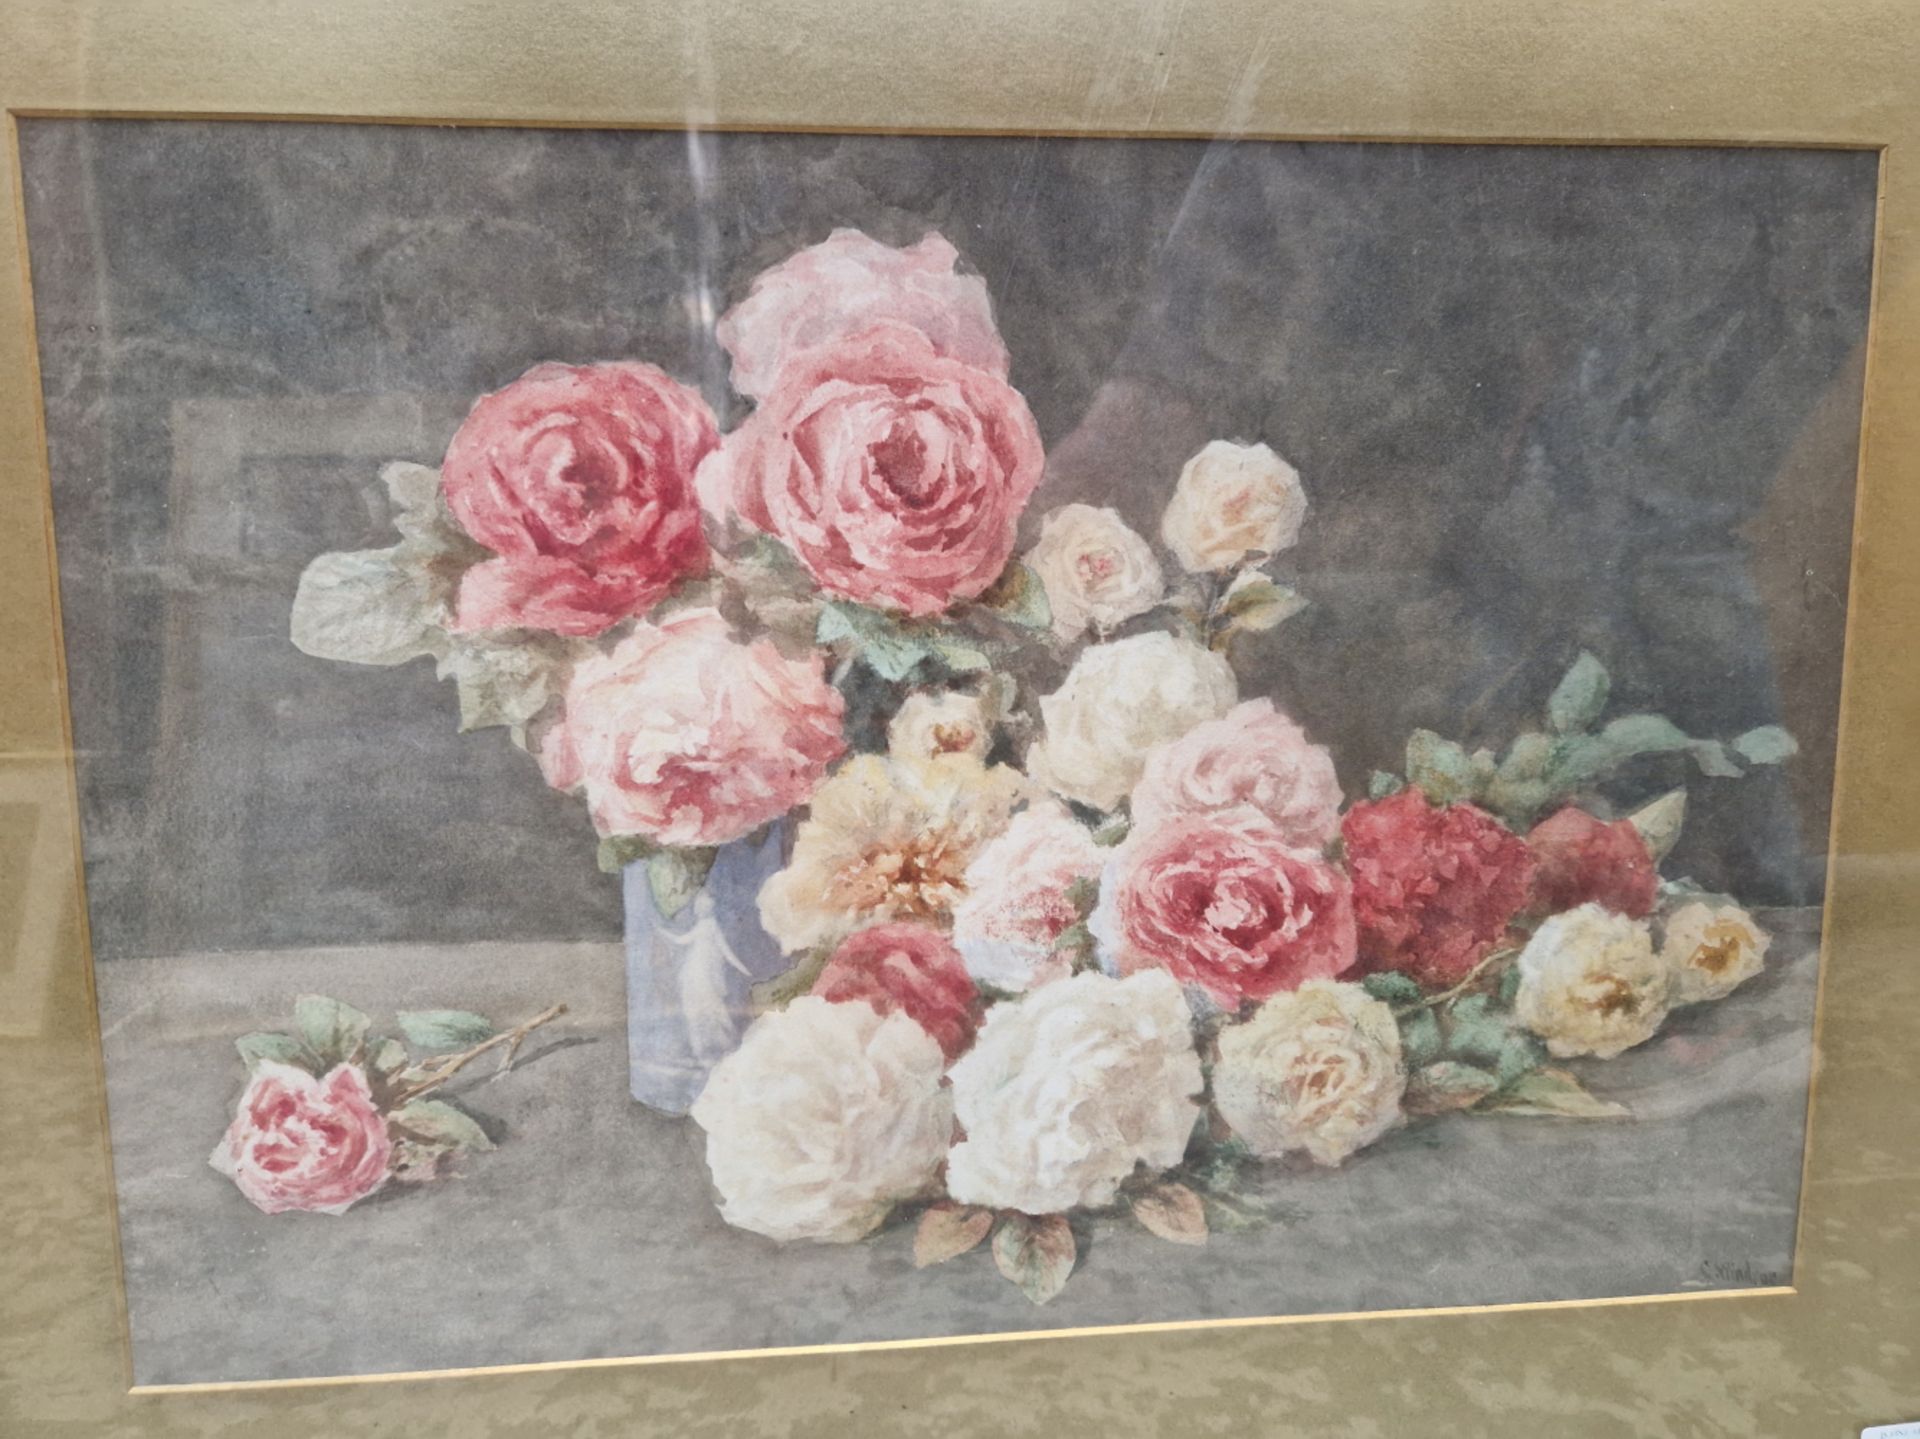 C. WINDSOR 19th/20th CENTURY ENGLISH SCHOOL STILL LIFE OF ROSES, SIGNED, WATERCOLOUR. 36 x 54cms